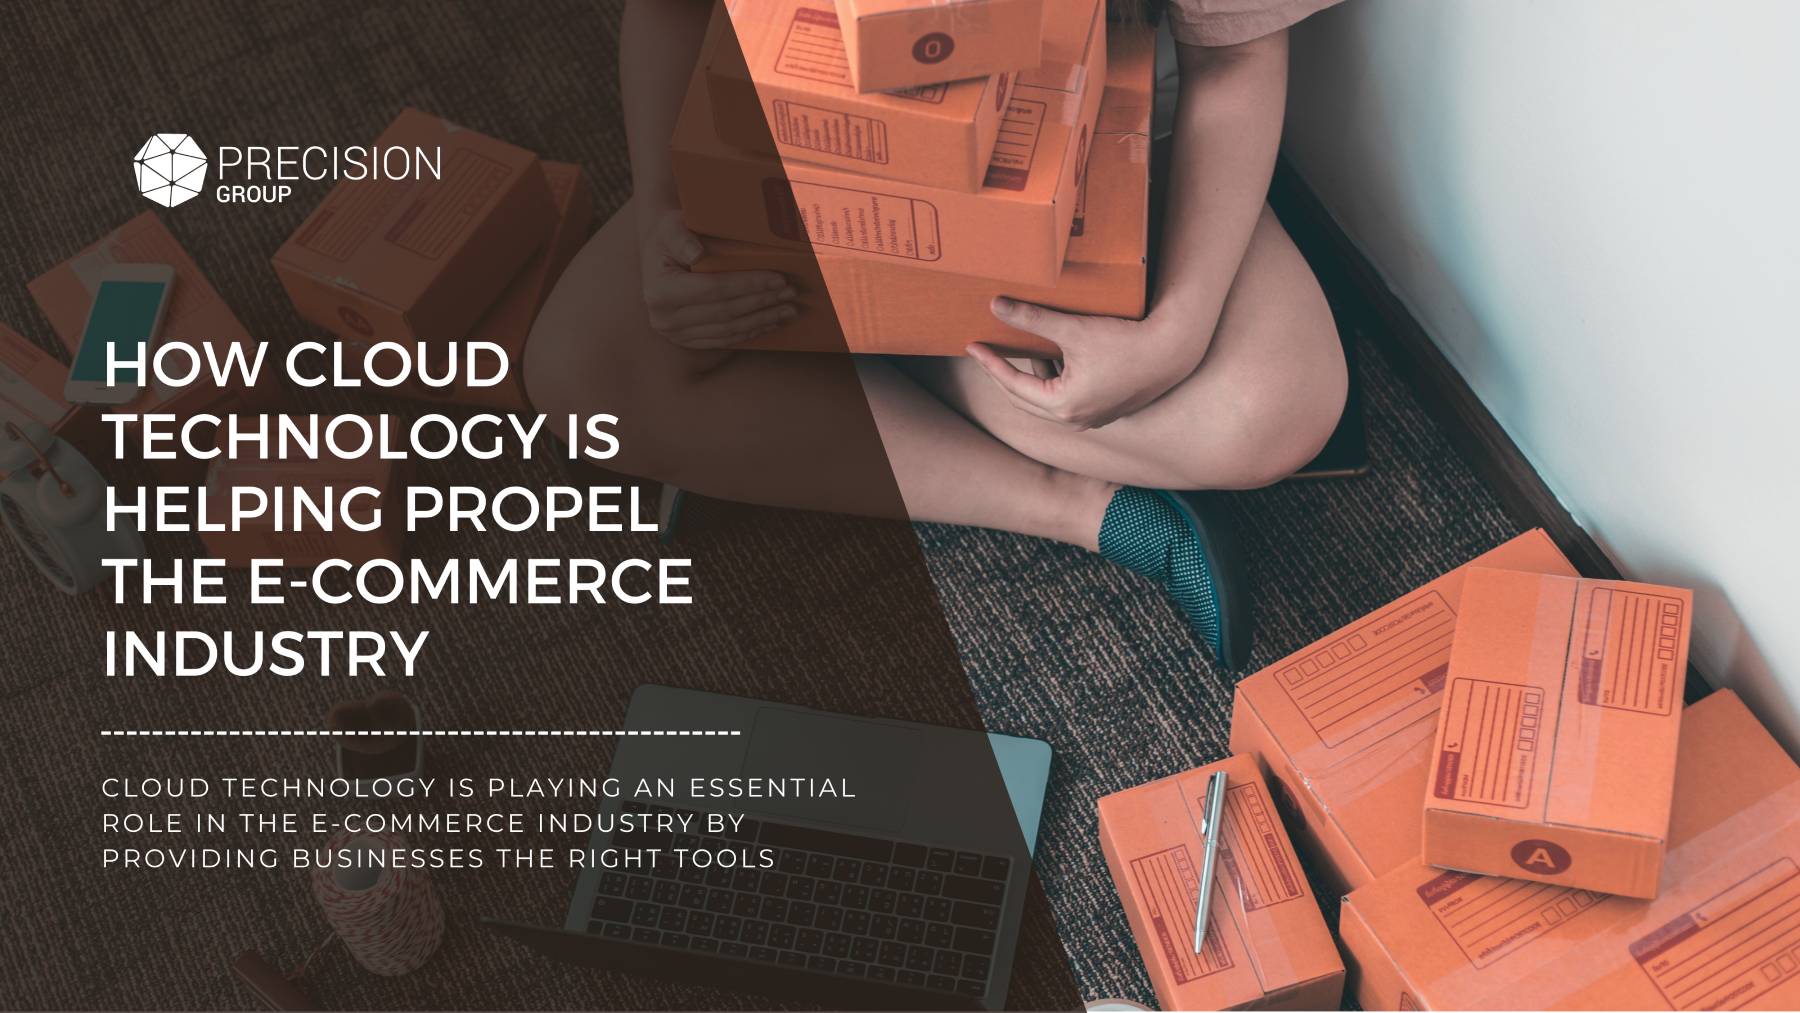 HOW CLOUD TECHNOLOGY IS HELPING PROPEL THE E-COMMERCE INDUSTRY